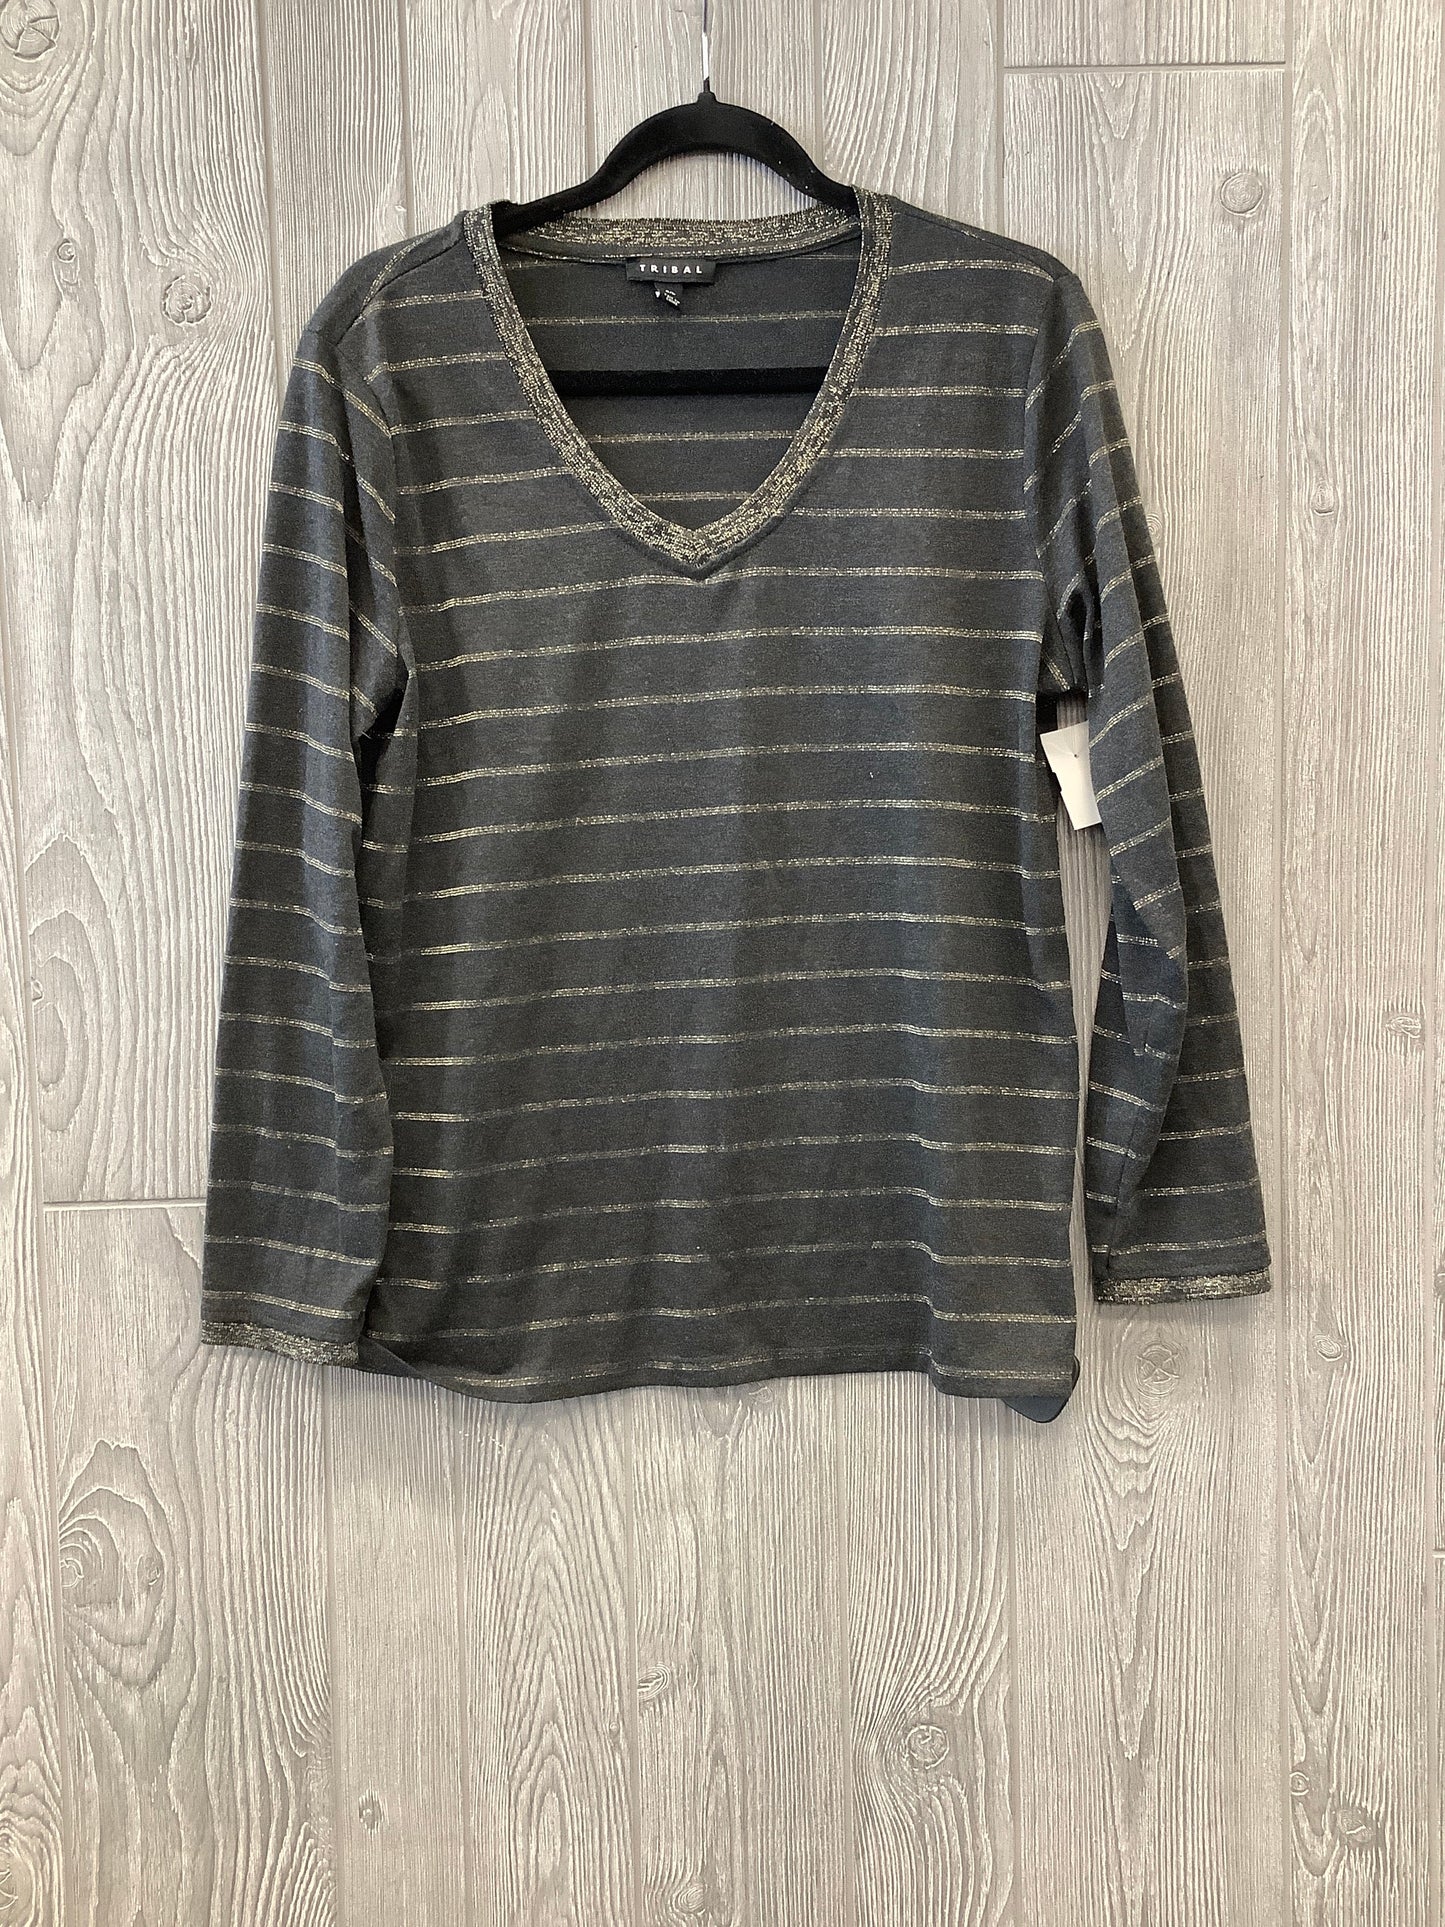 Striped Pattern Top Long Sleeve Tribal, Size Large